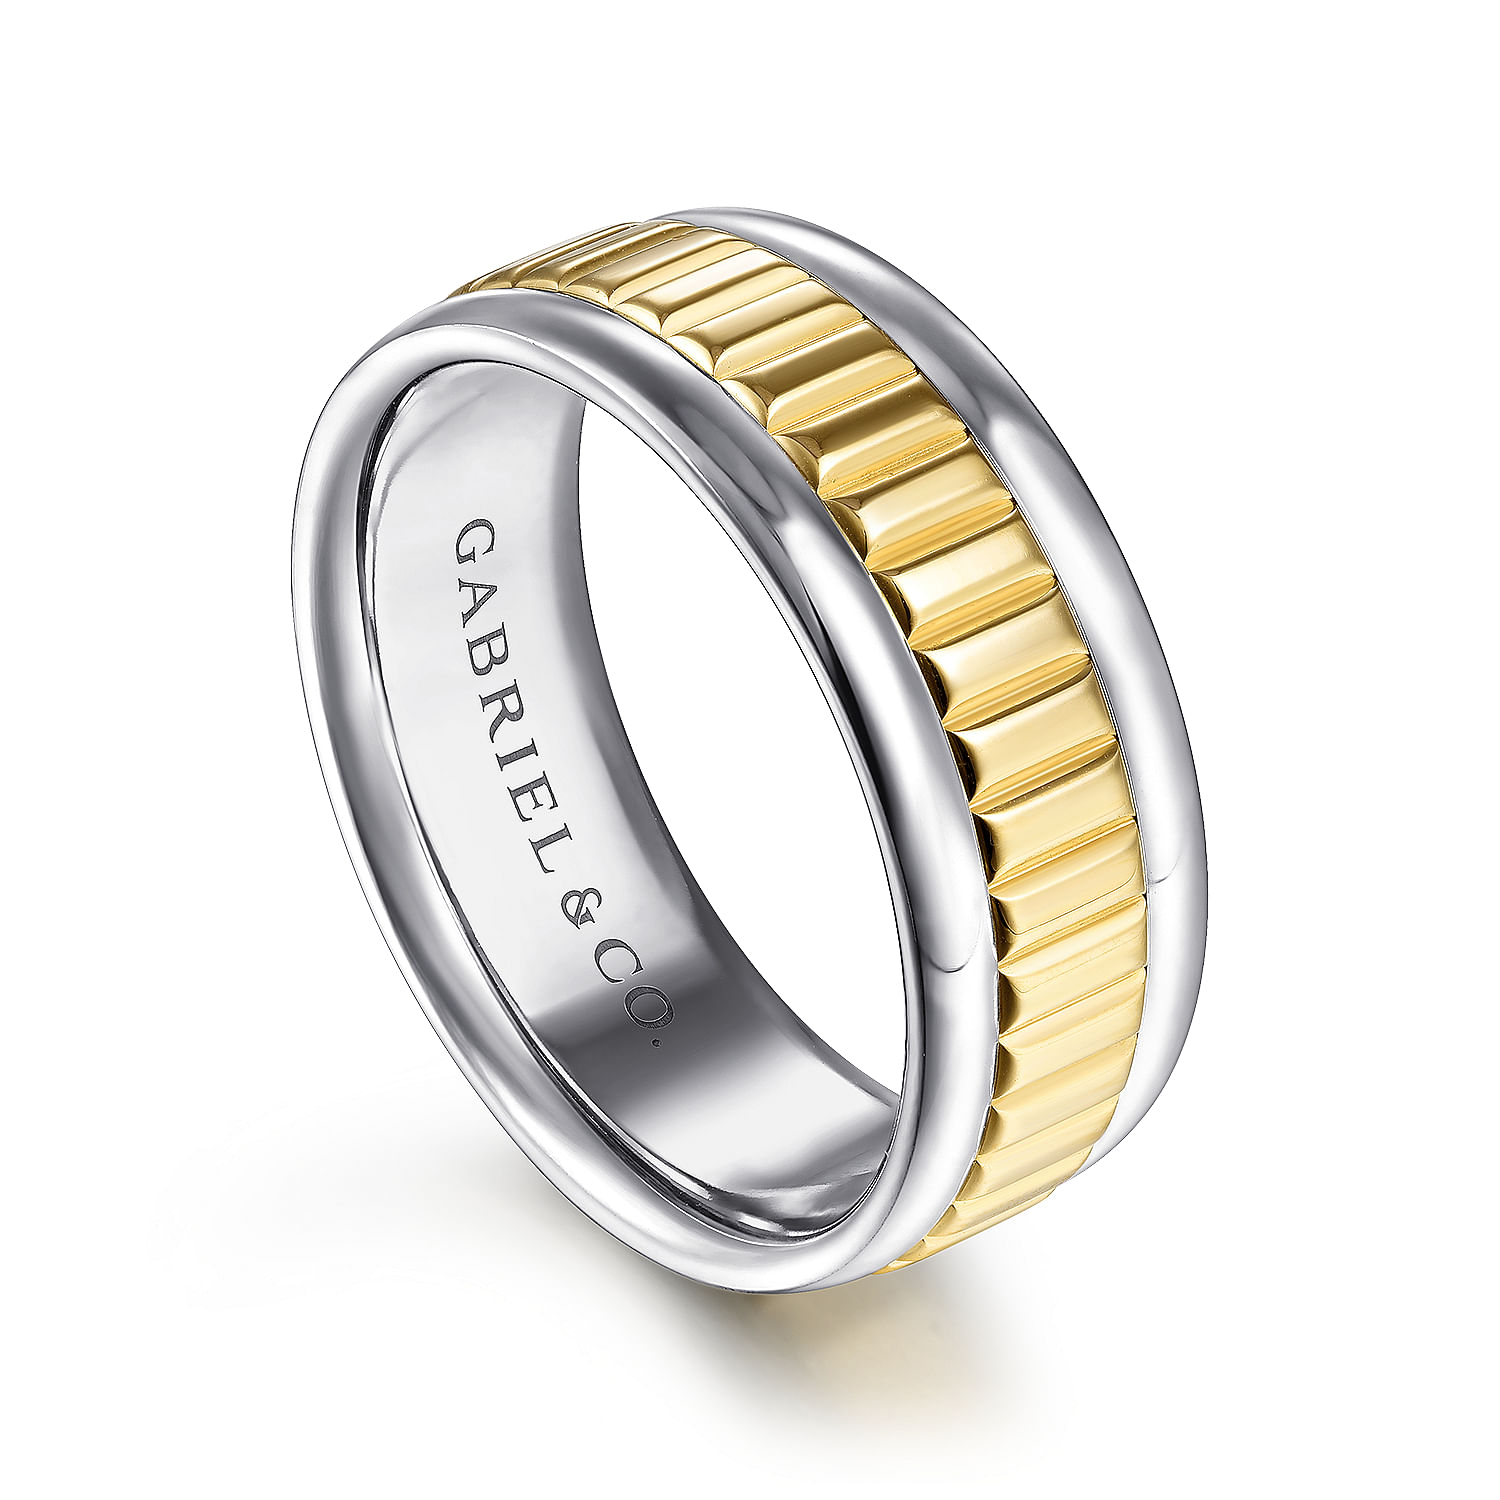 14K White-Yellow Gold 8mm - Two Tone Carved Men's Wedding Band in High Polish Finish